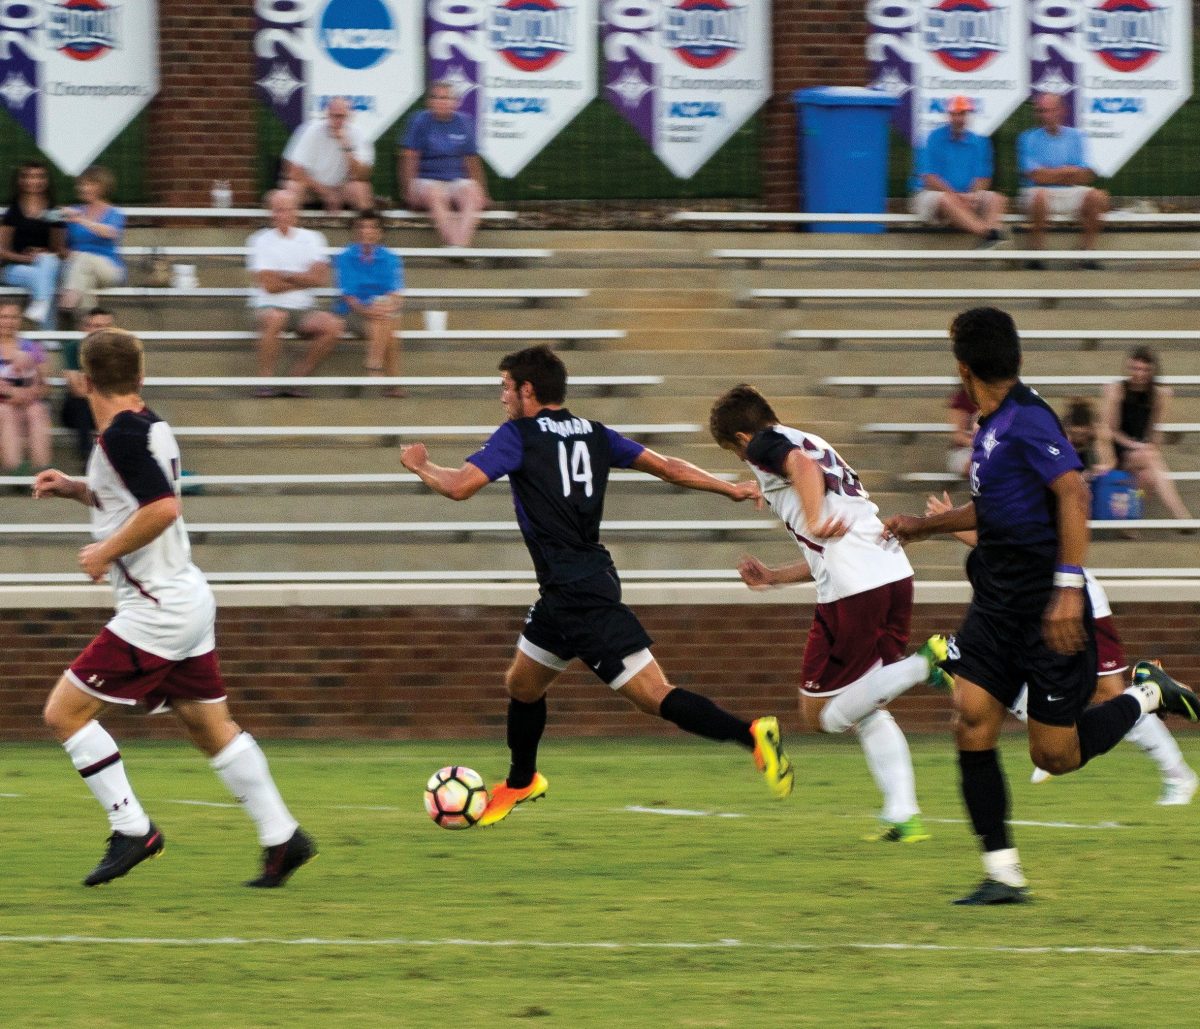 Paladins Find Their Stride: Men’s Soccer Team Looks to Gain Momentum From Win Over Nationally Ranked Kentucky